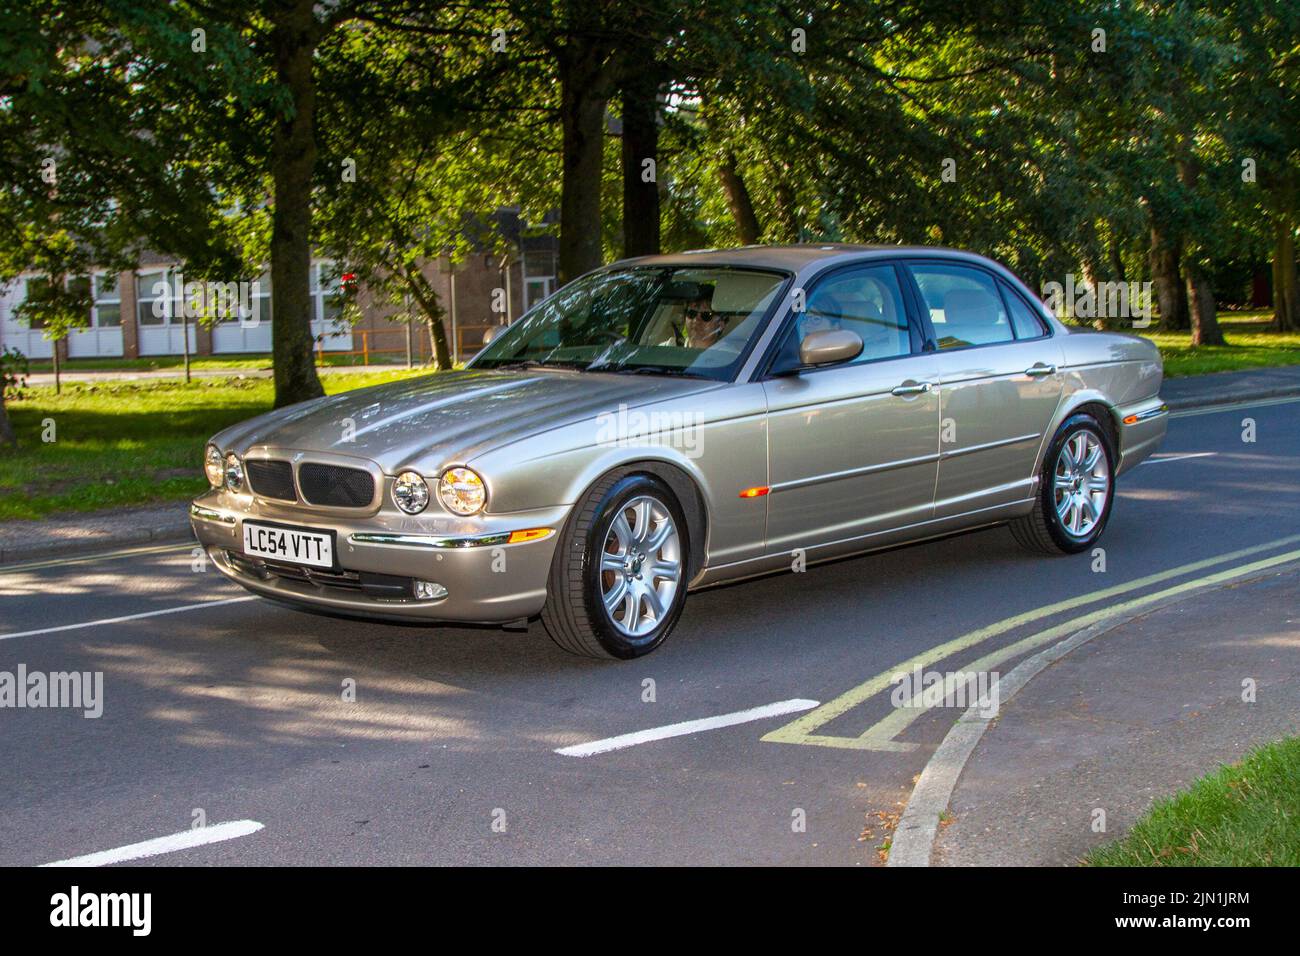 2004 Beige British Jaguar XJ V8 Sport petrol 3555cc 6-speed manual luxury automobile; Collectable cars are travelling to display at the 13th Lytham Hall Summer Classic Car & Motorcycle Show, a Classic Vintage Collectible Transport Festival. Stock Photo